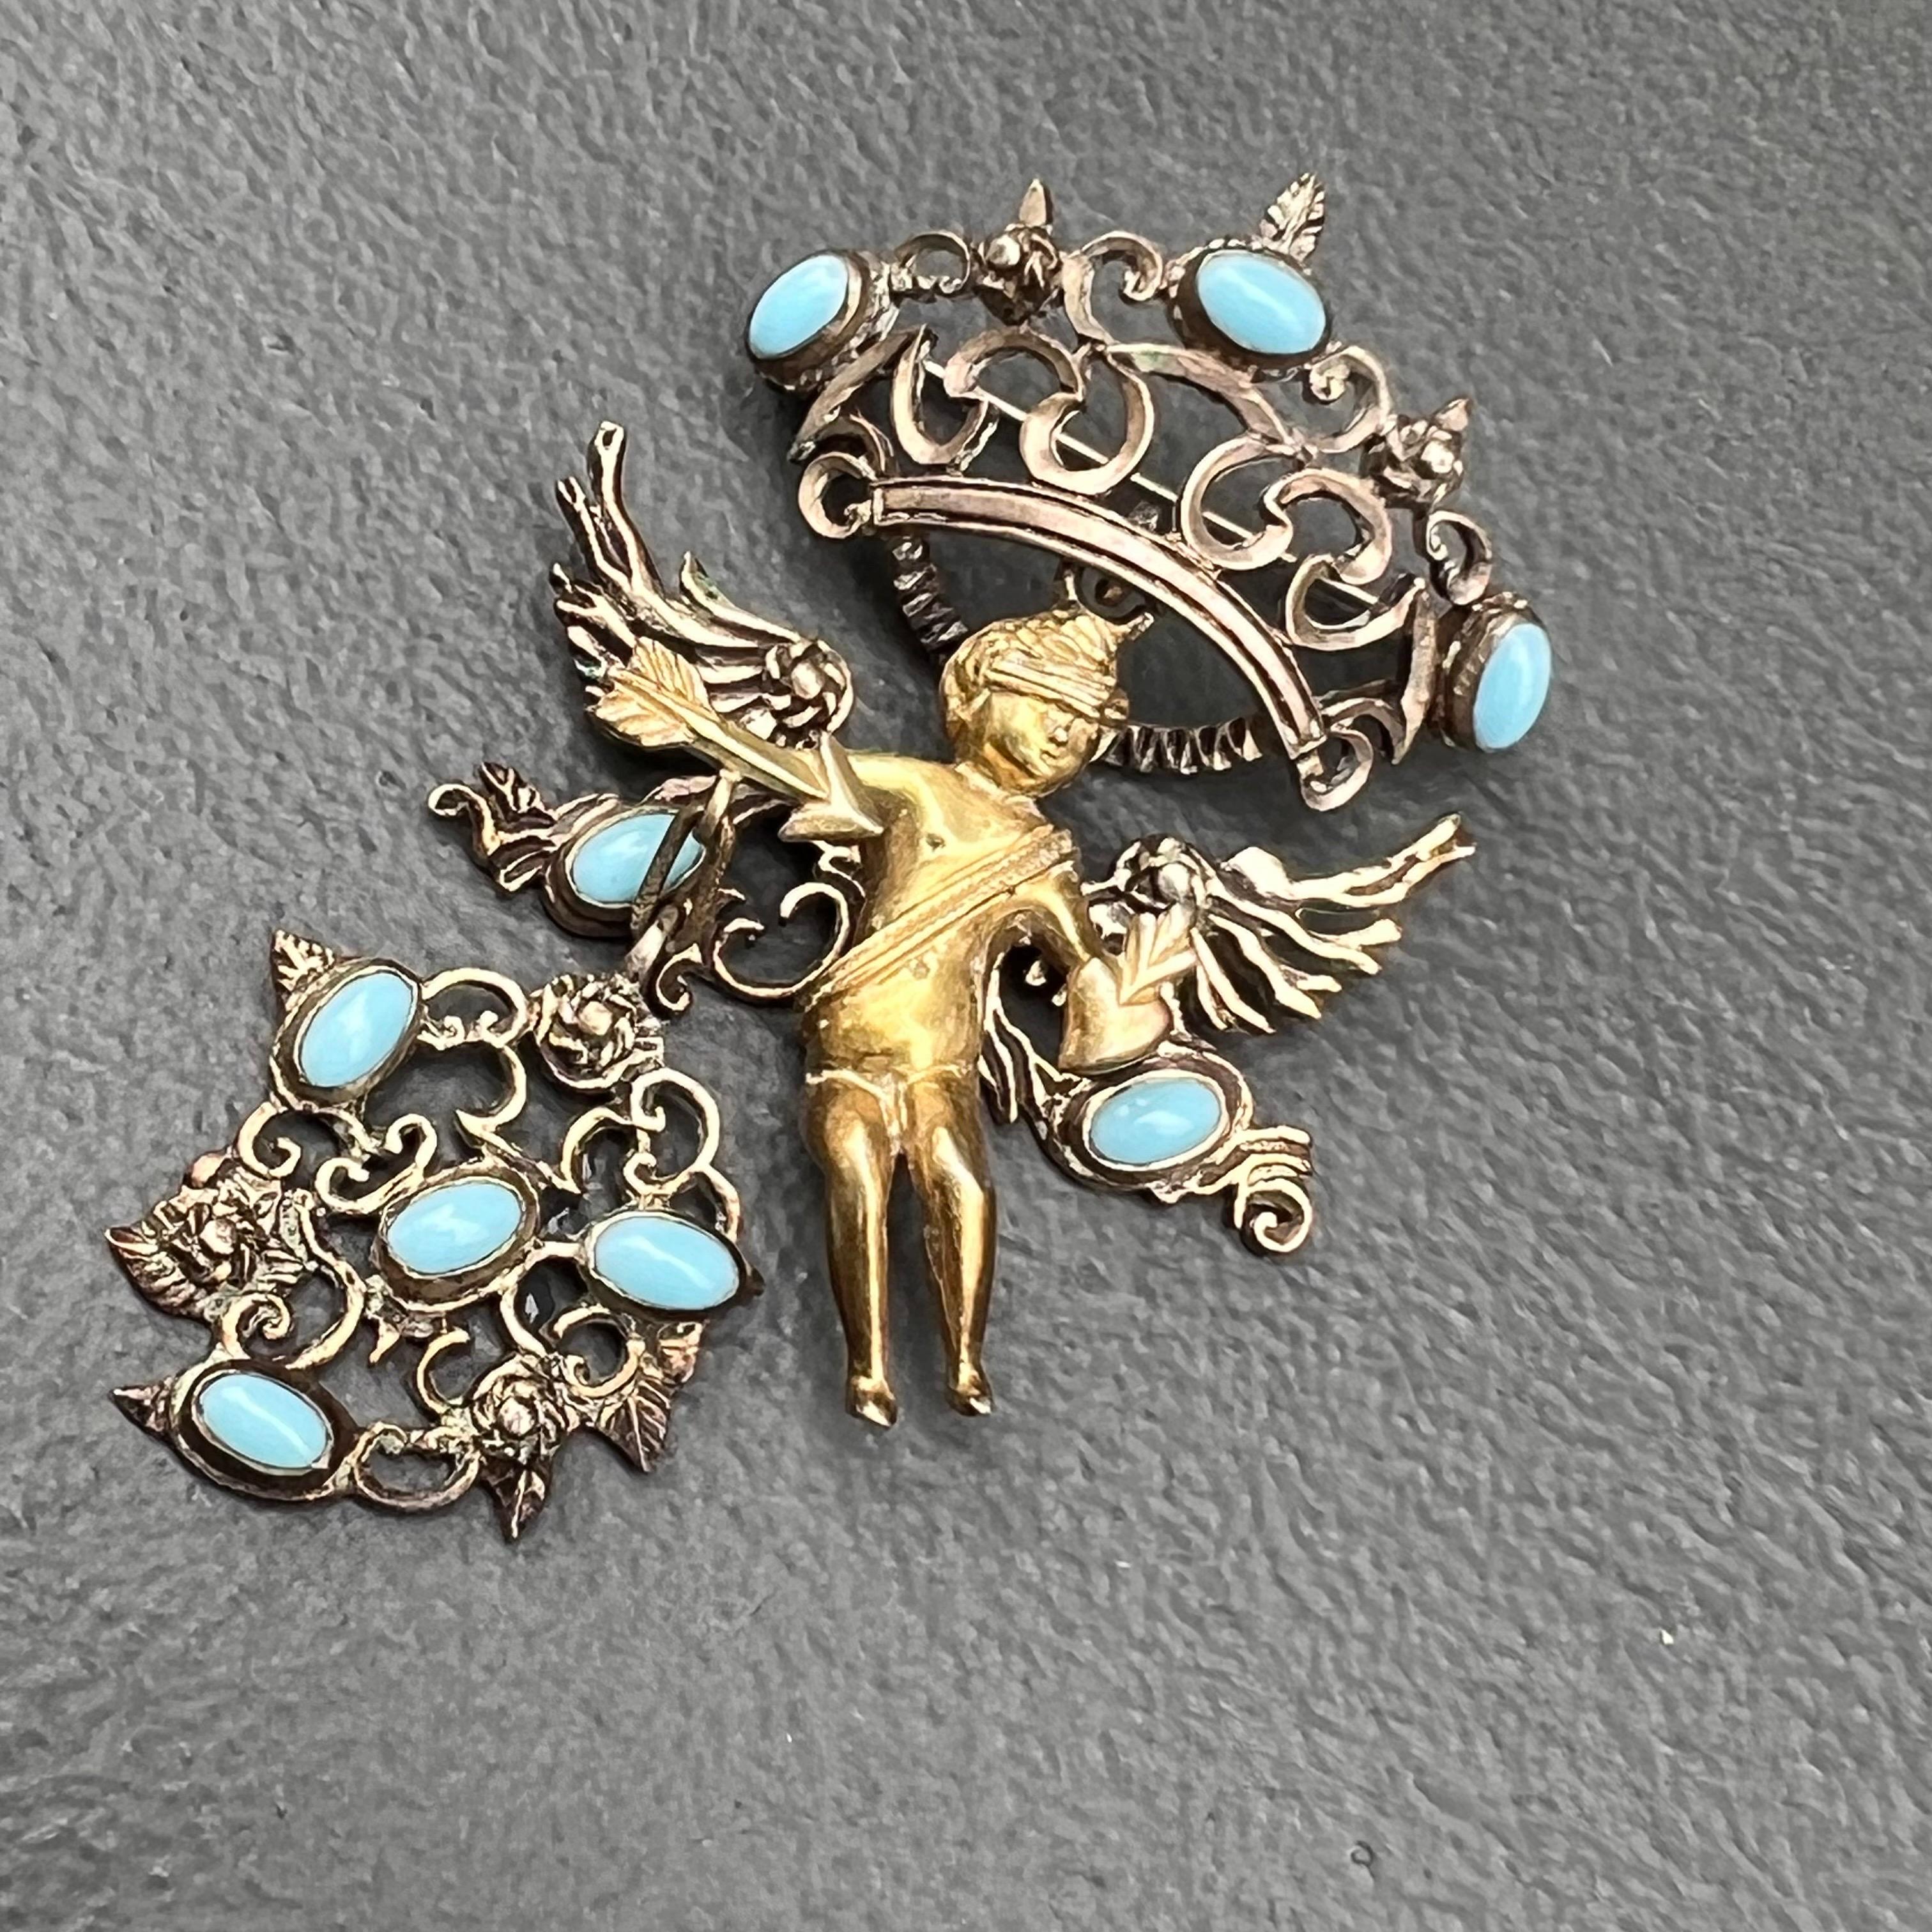 Antique Renaissance revival Austro Hungarian gold gilded silver articulated  pendant /pin / brooch featuring a detailed winged Cherub holding and arrow in one hand and heart in another . The top crown and bottom open work panel moves with movement